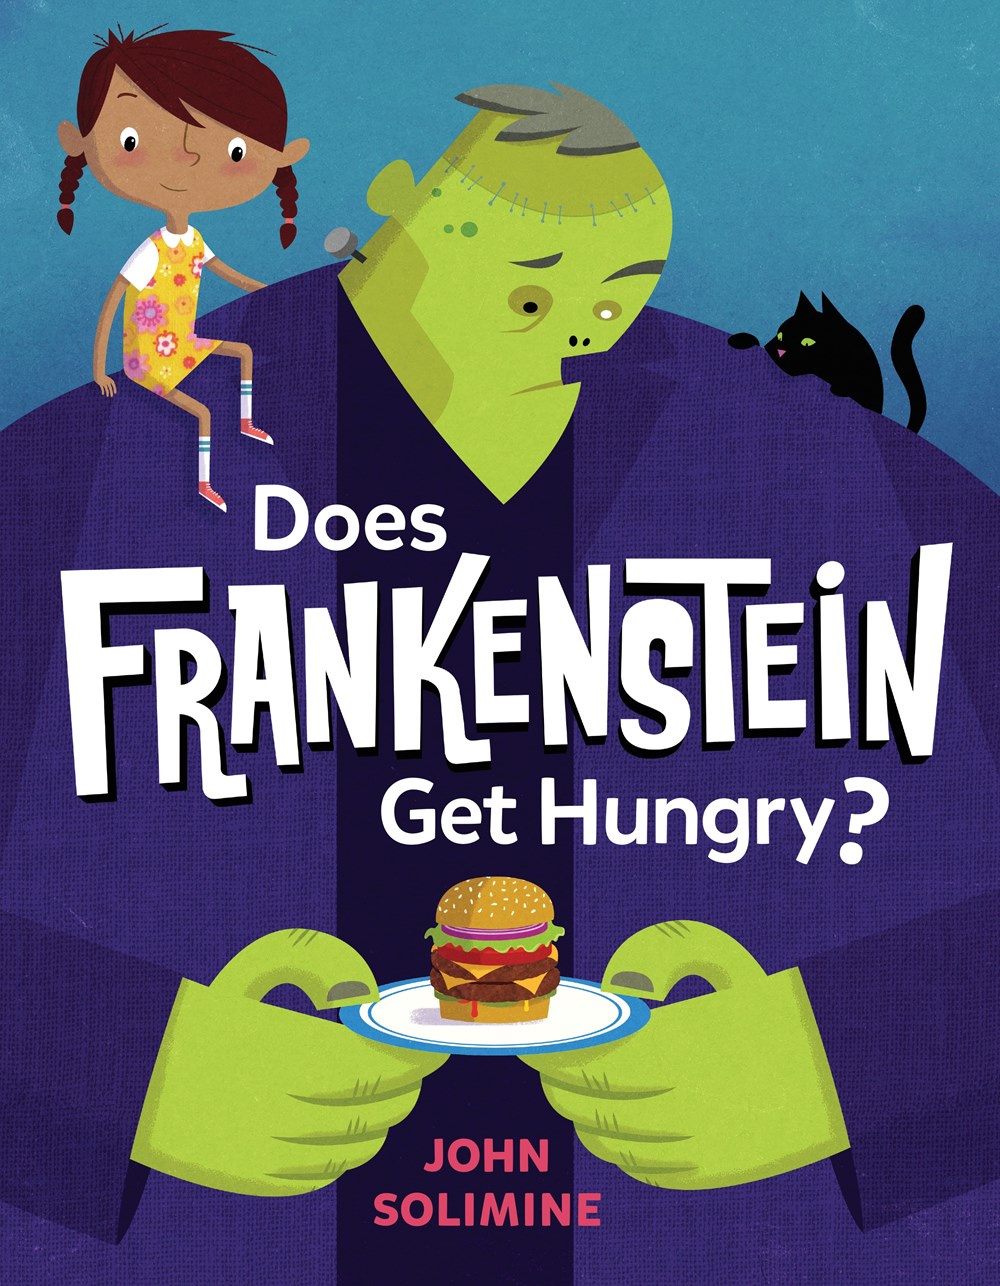 Sunday Story Time with John Solimine (Author & Illustrator of Does Frankenstein Get Hungry?)